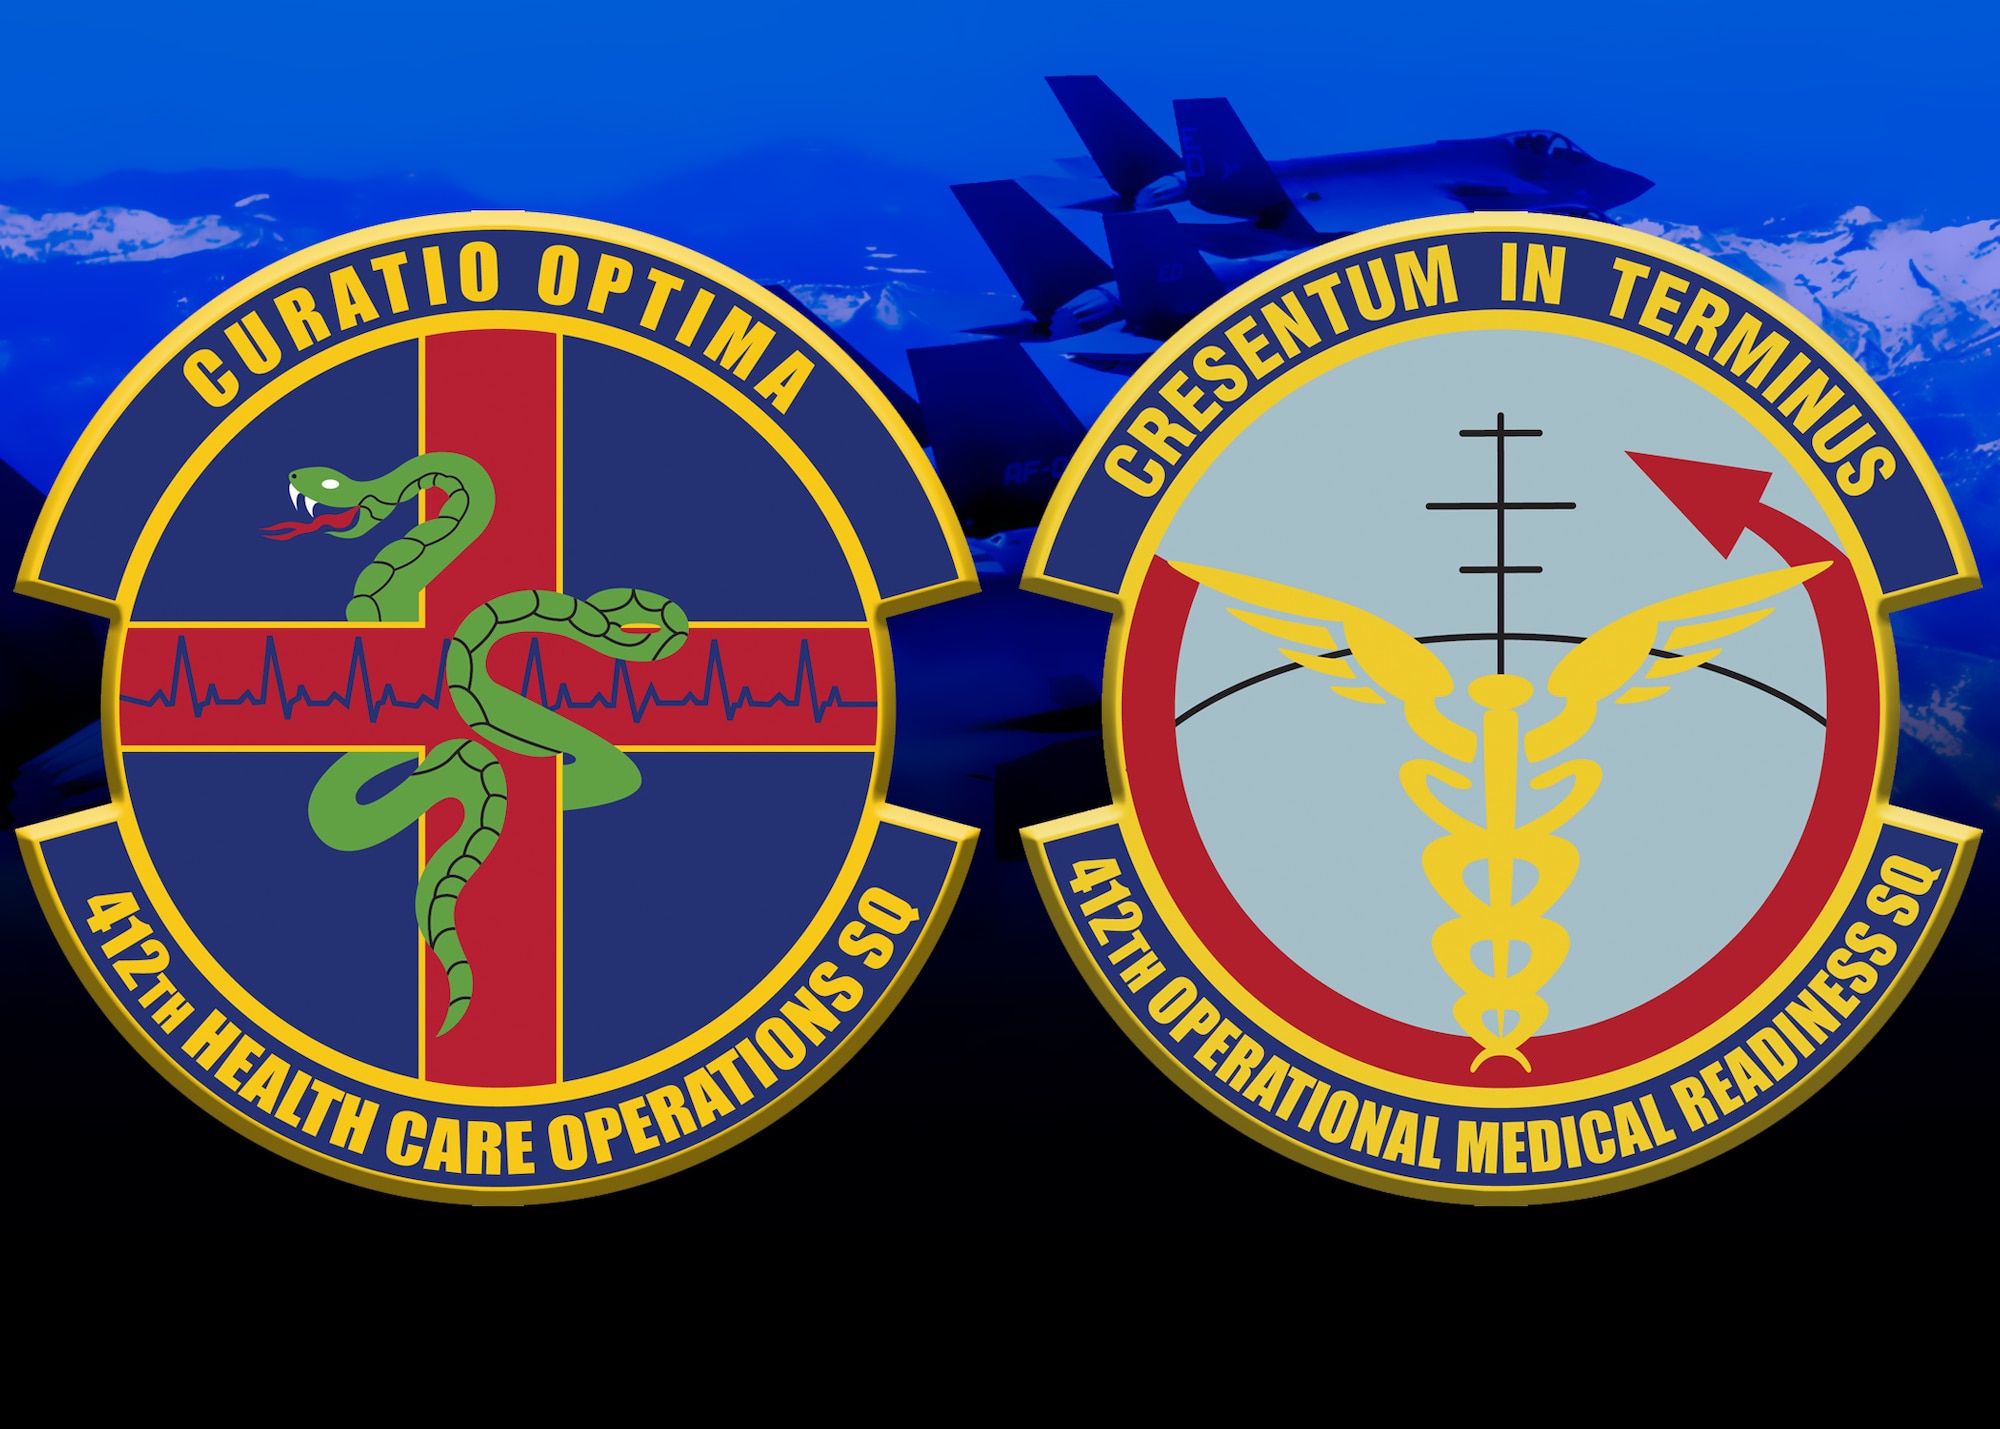 The two newest squadrons at Edwards Air Force Base: the 412th Health Care Operations Squadron and the 412th Operational Medical Readiness Squadron. (U.S. Air Force graphic by 412th Test Wing Public Affairs)